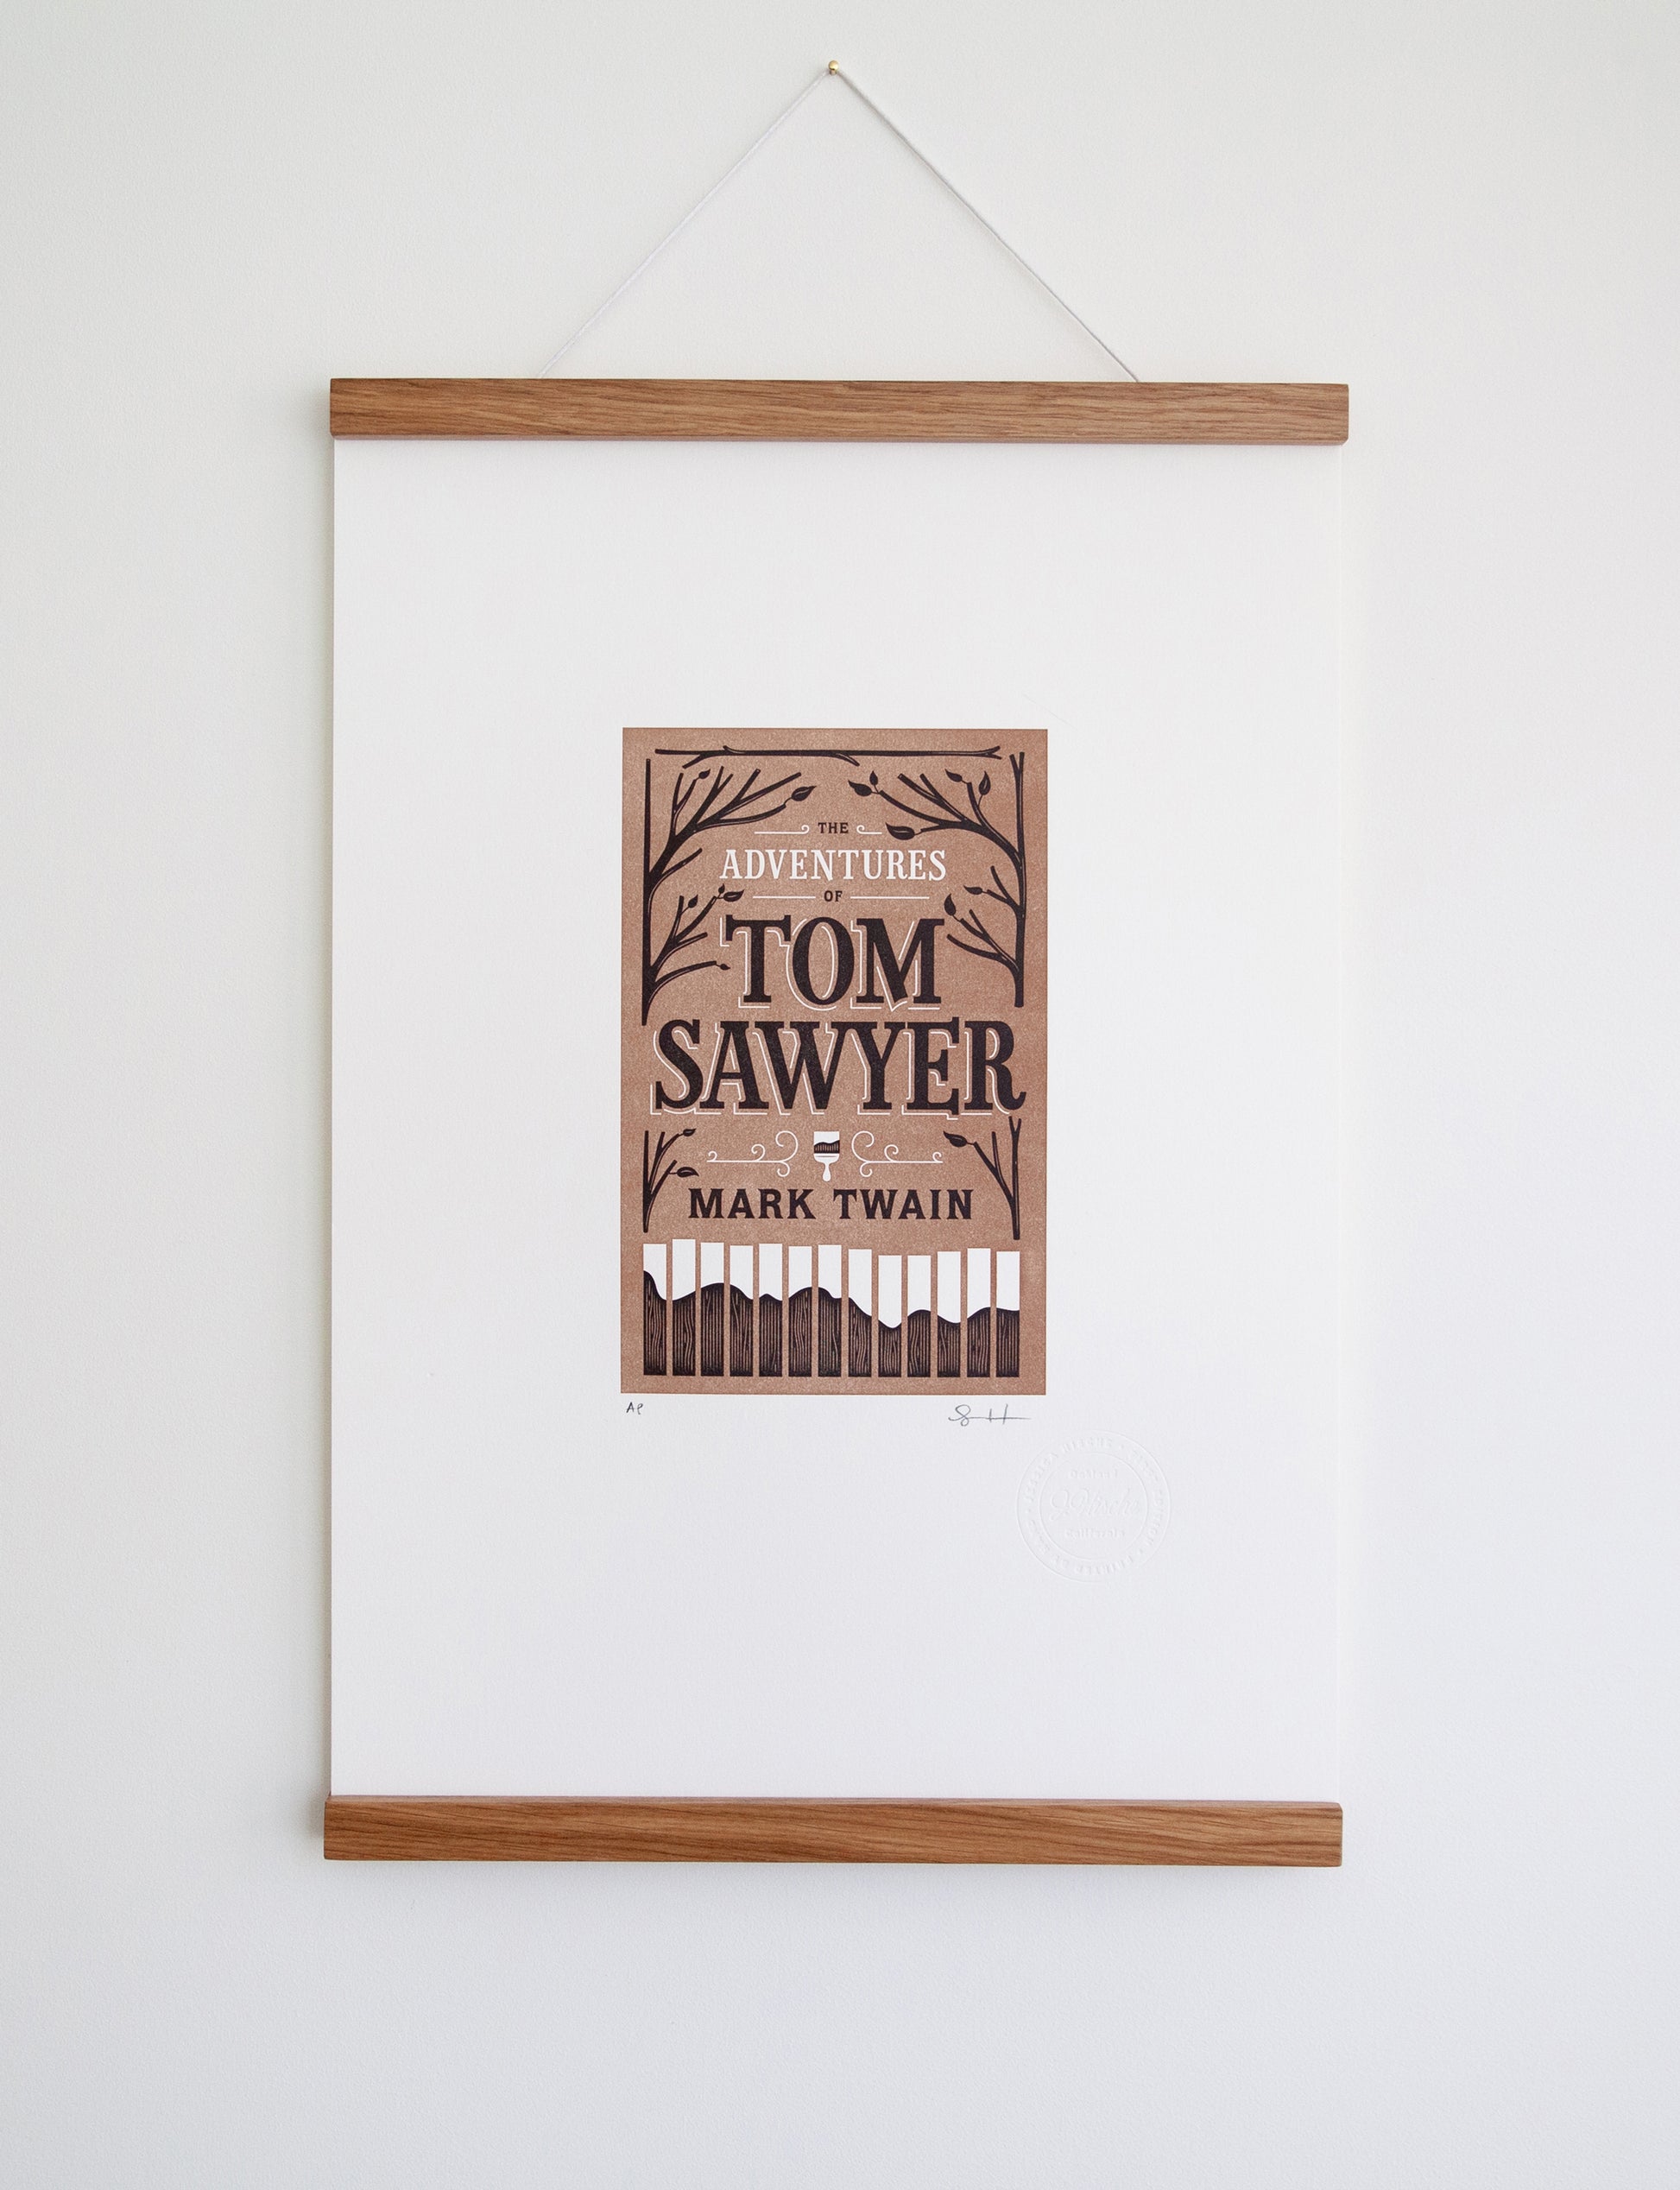 Framed 2-color letterpress print in brown and black. Printed artwork is an illustrated book cover of The Adventures of Tom Sawyer including custom hand lettering.